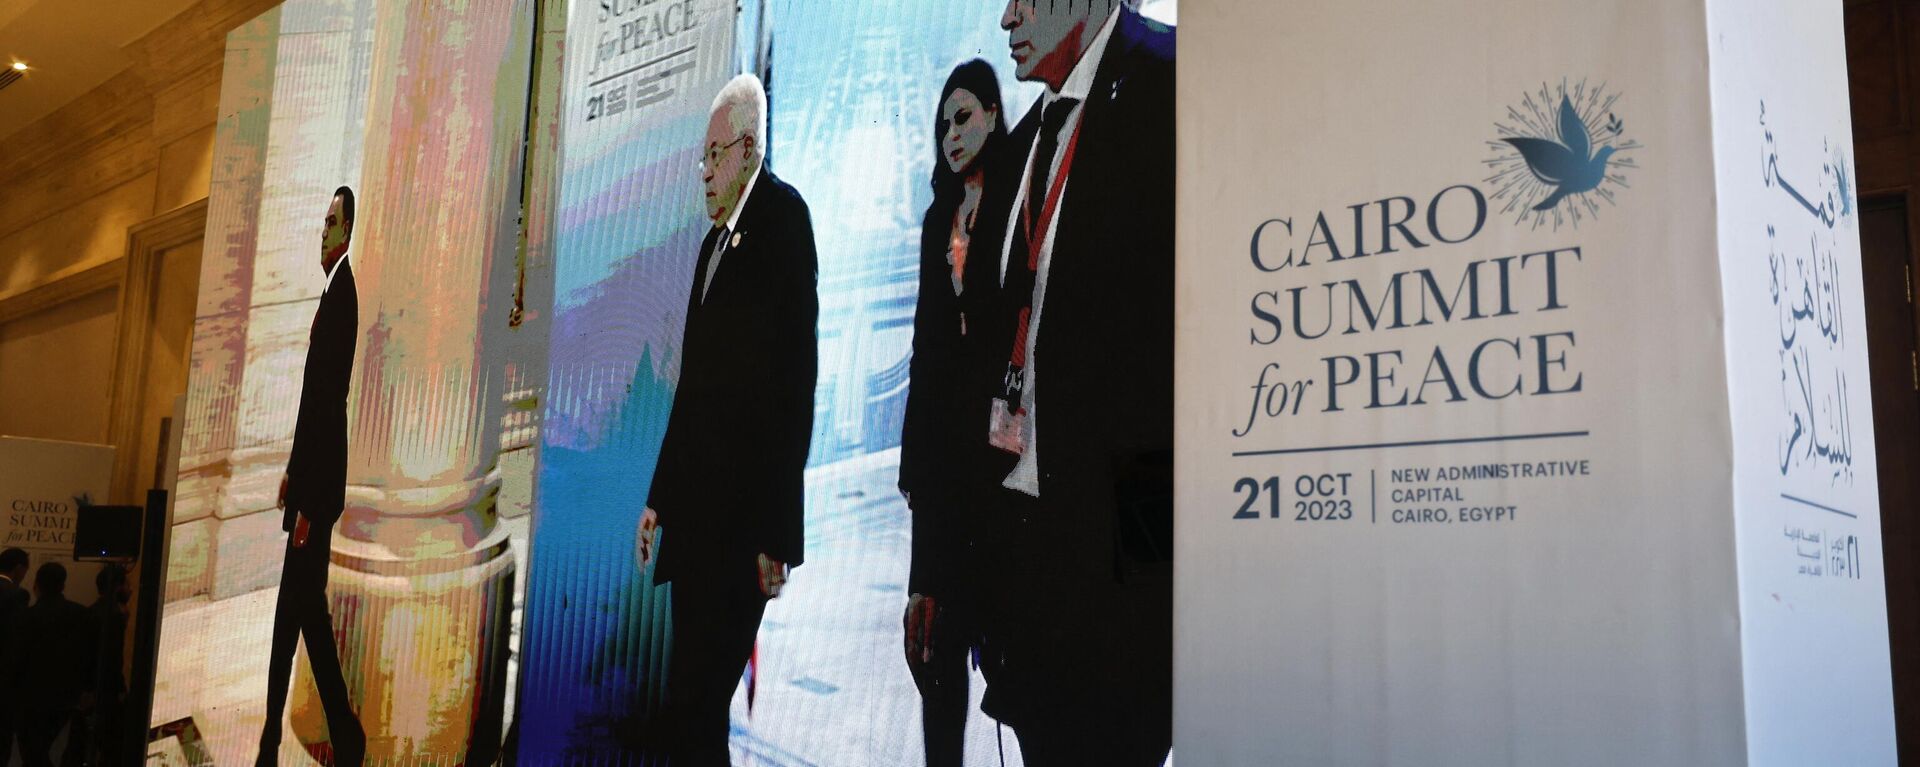 Seen on a large screen the Palestinian president Mahmud Abbas arrives to attend the International Peace Summit hosted by the Egyptian president in Cairo on October 21, 2023, amid the ongoing battles between Israel and the Palestinian group Hamas. - Sputnik Africa, 1920, 21.10.2023